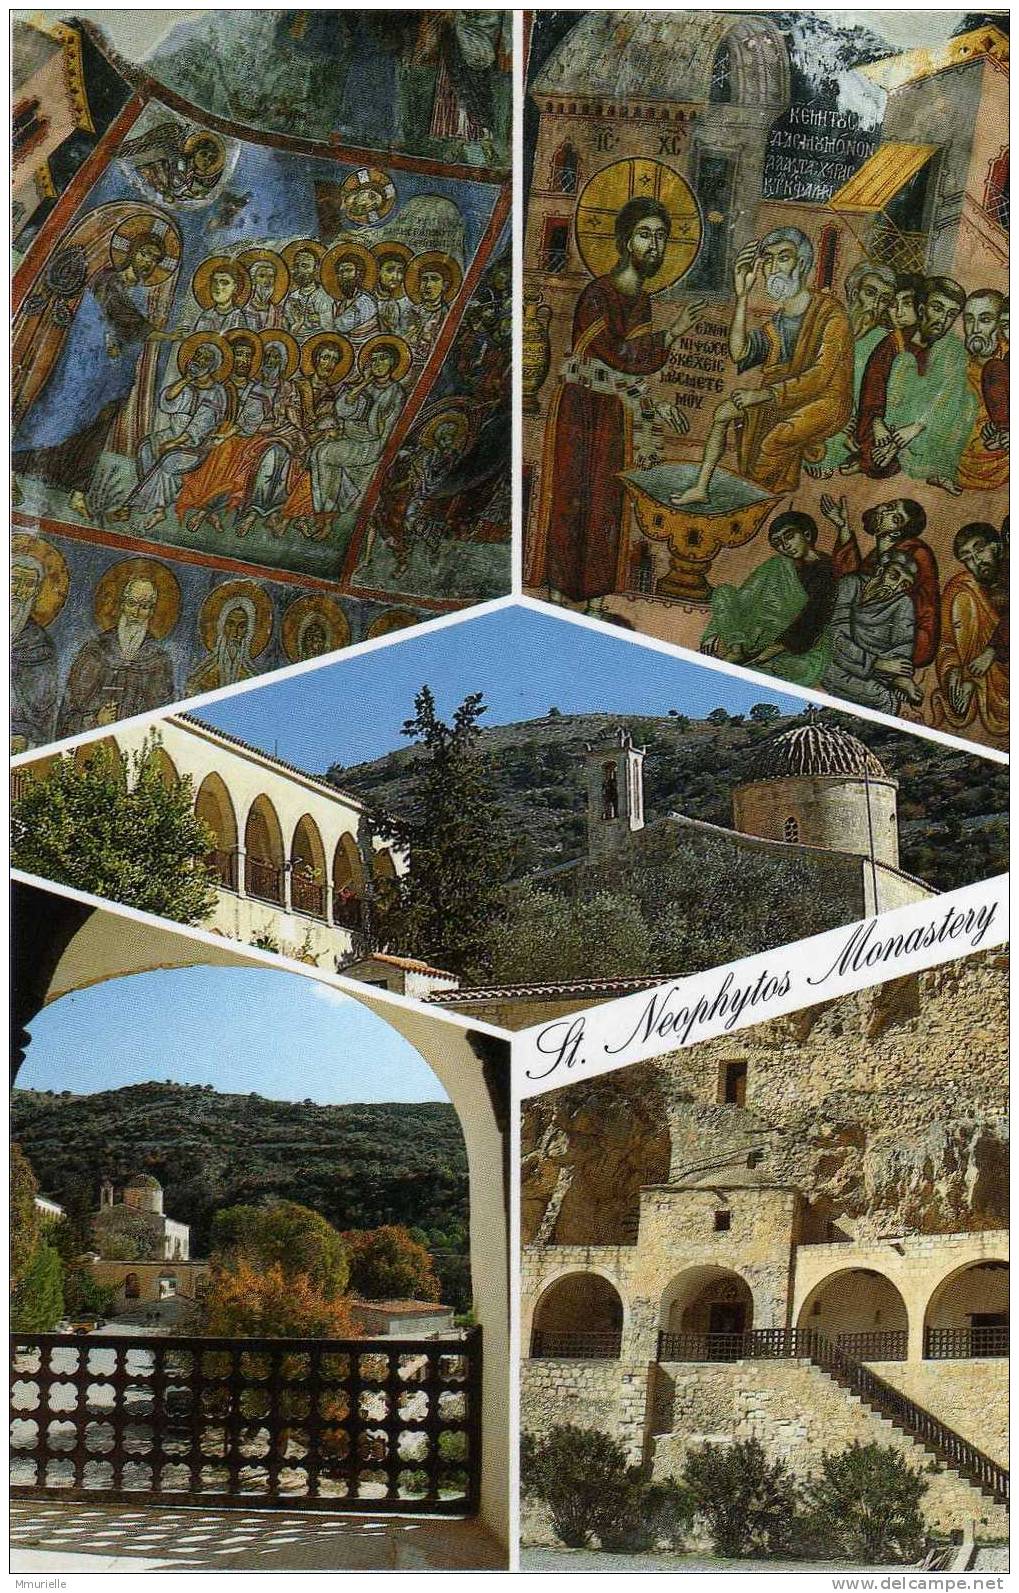 CHYPRE-ST NEOPHYTOS MONASTERY CYPRUS Monastery Ans Frescoes-MB - Chipre